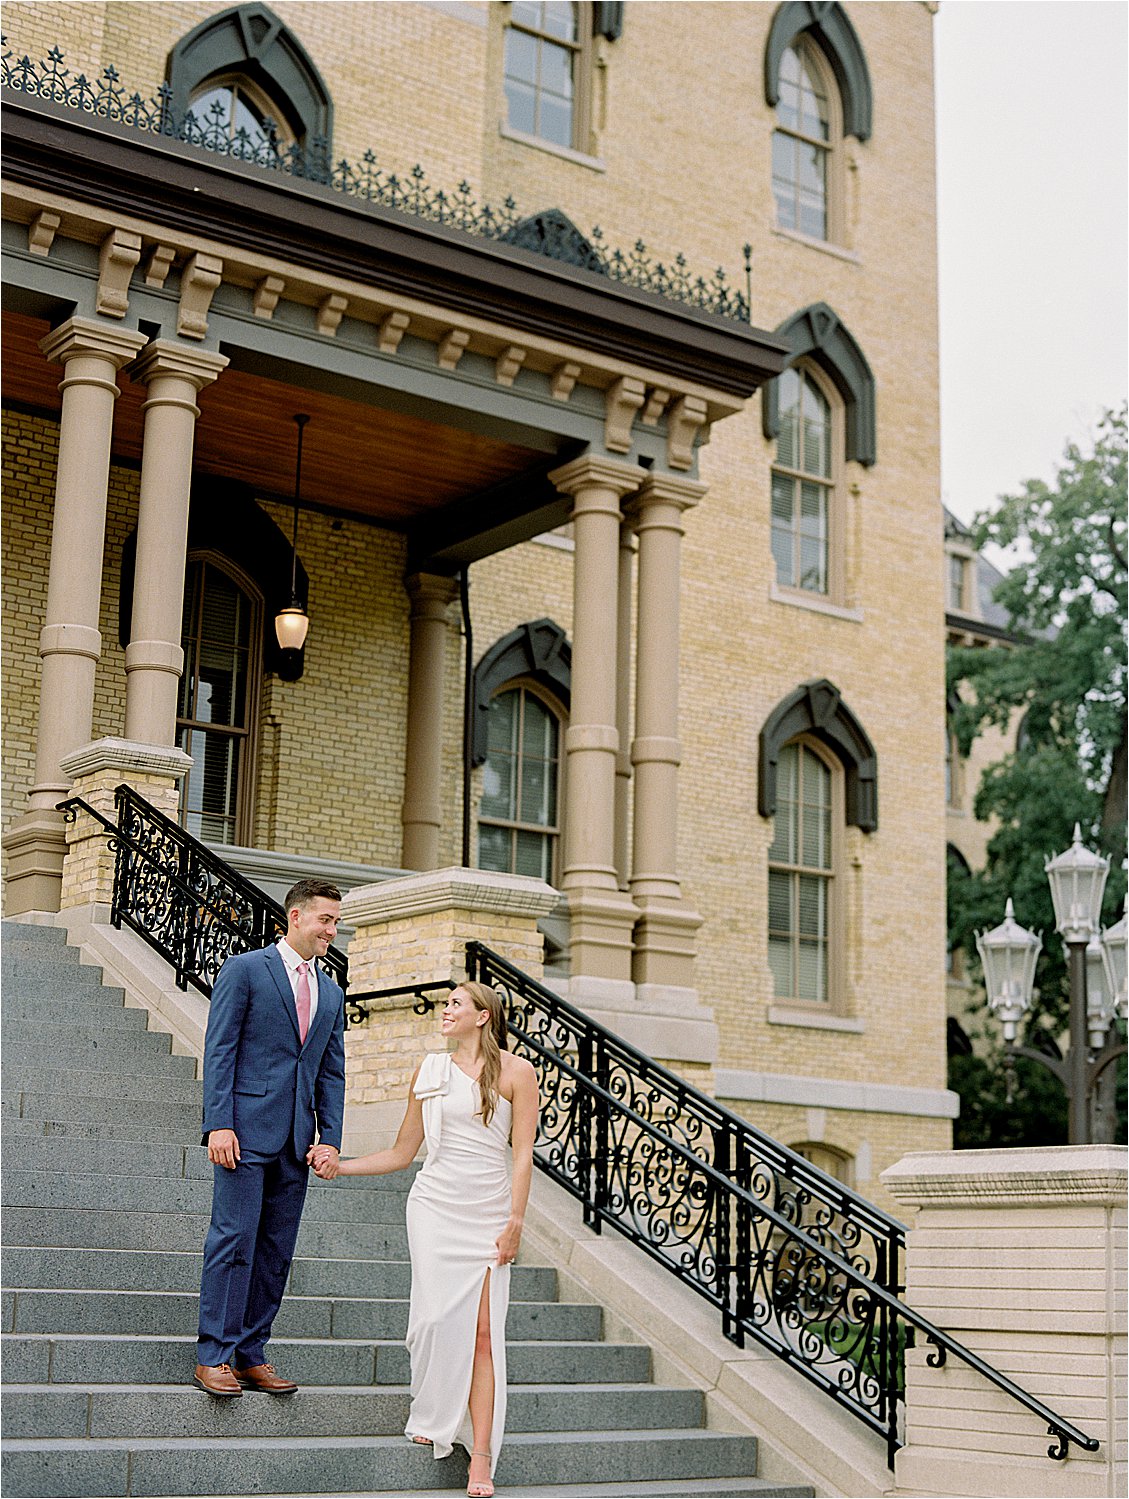 South Bend Indiana Engagement Session at University of Notre Dame with Chicago Film Wedding Photographer Renee Hollingshead